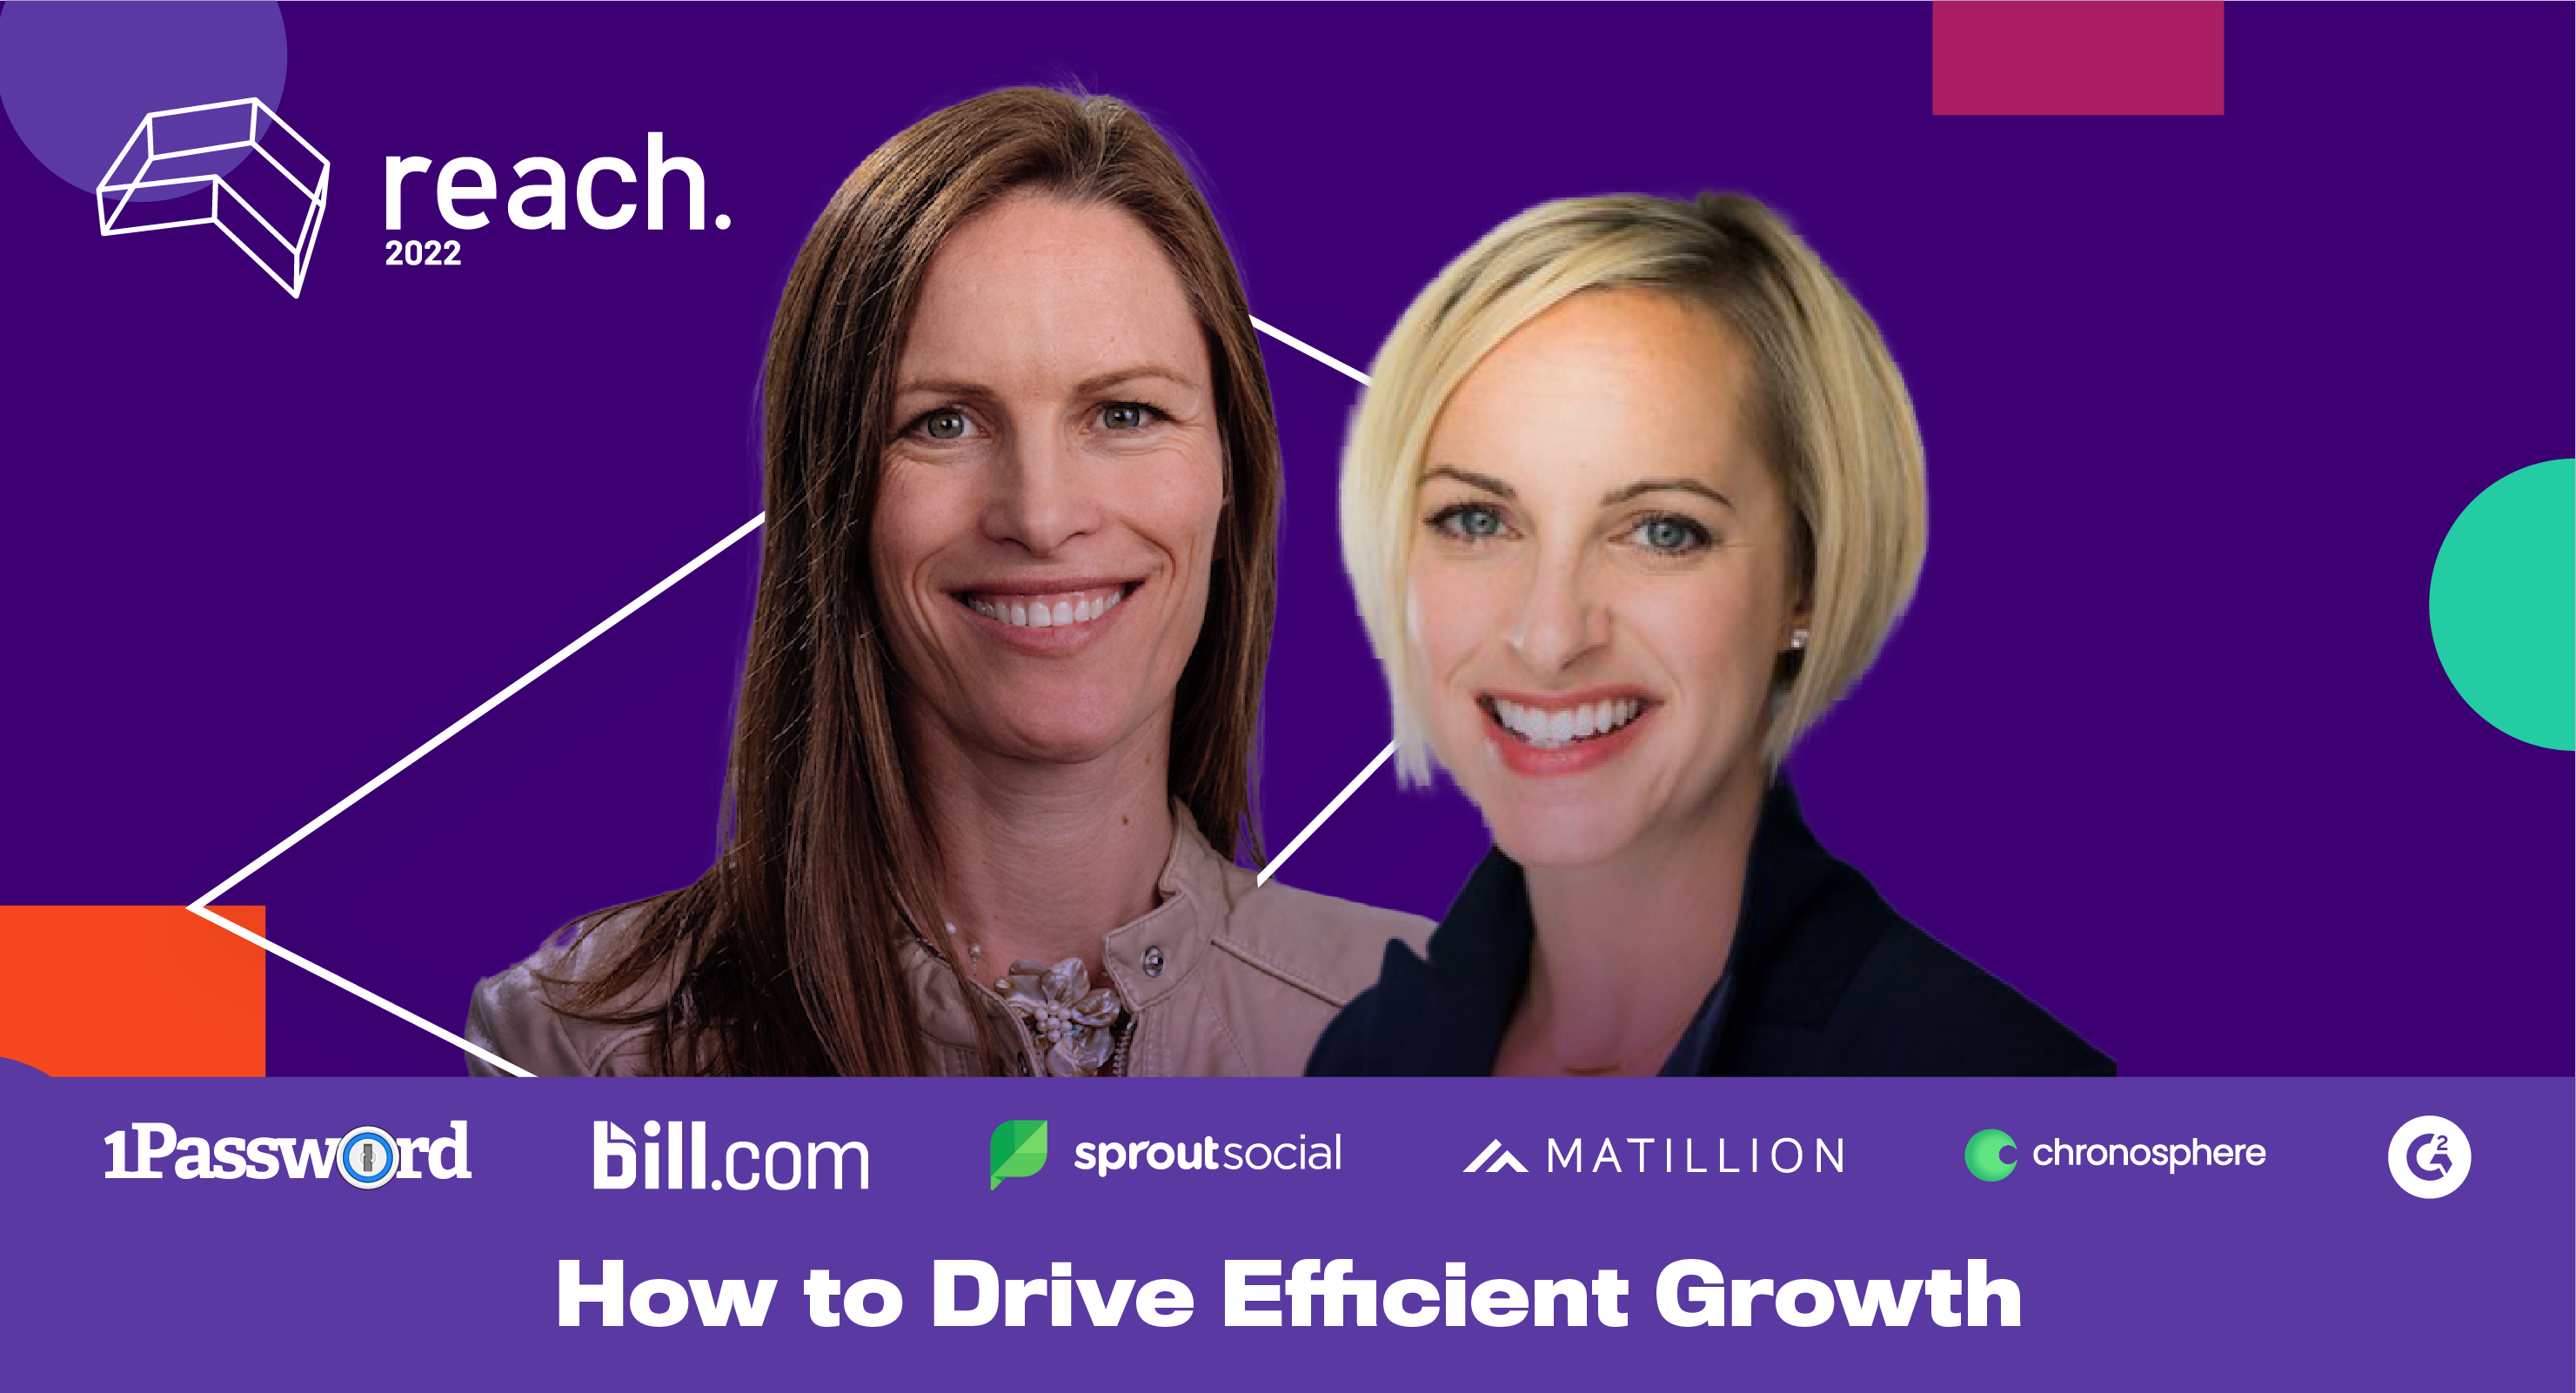 How to Drive Effective Growth with Demand Generation: A Conversation with Carilu Dietrich